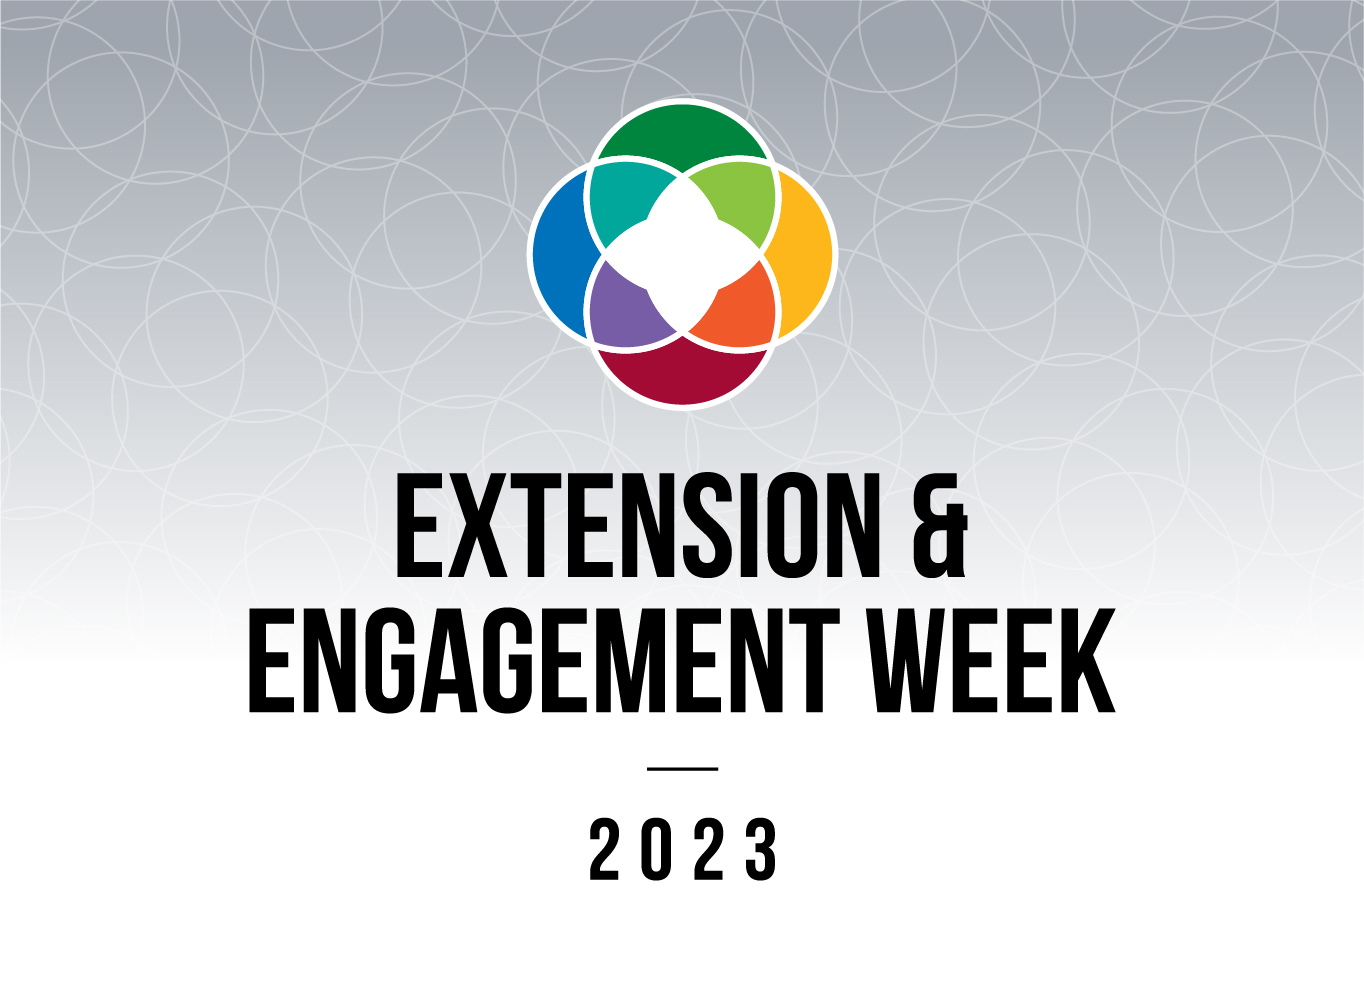 Extension and Engagement Week 2023 logo